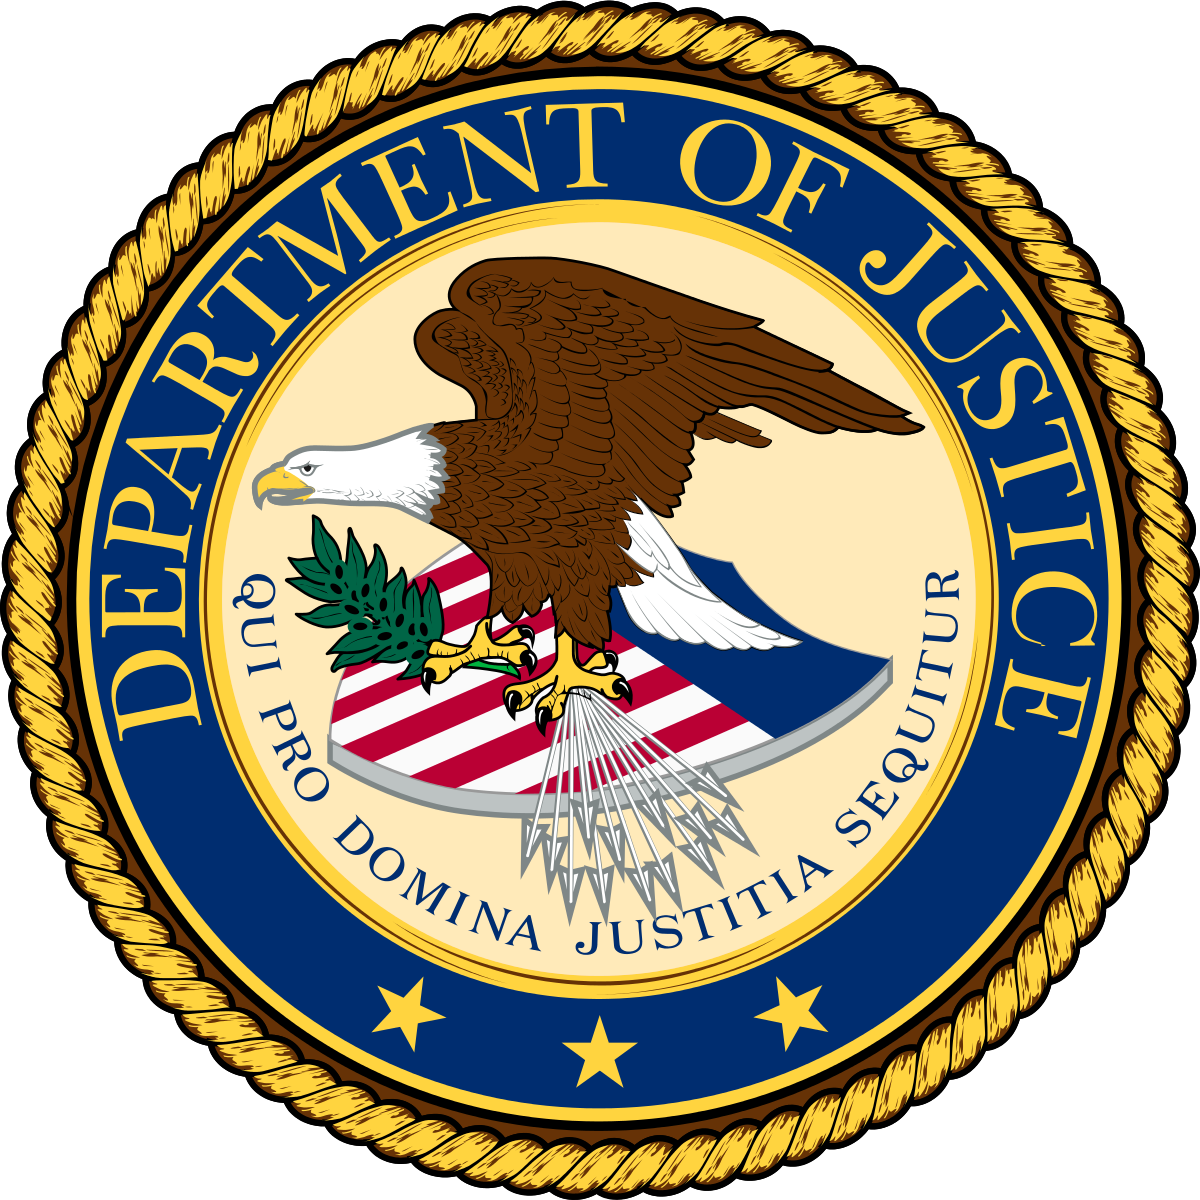 The seal of the United States Department of Justice.